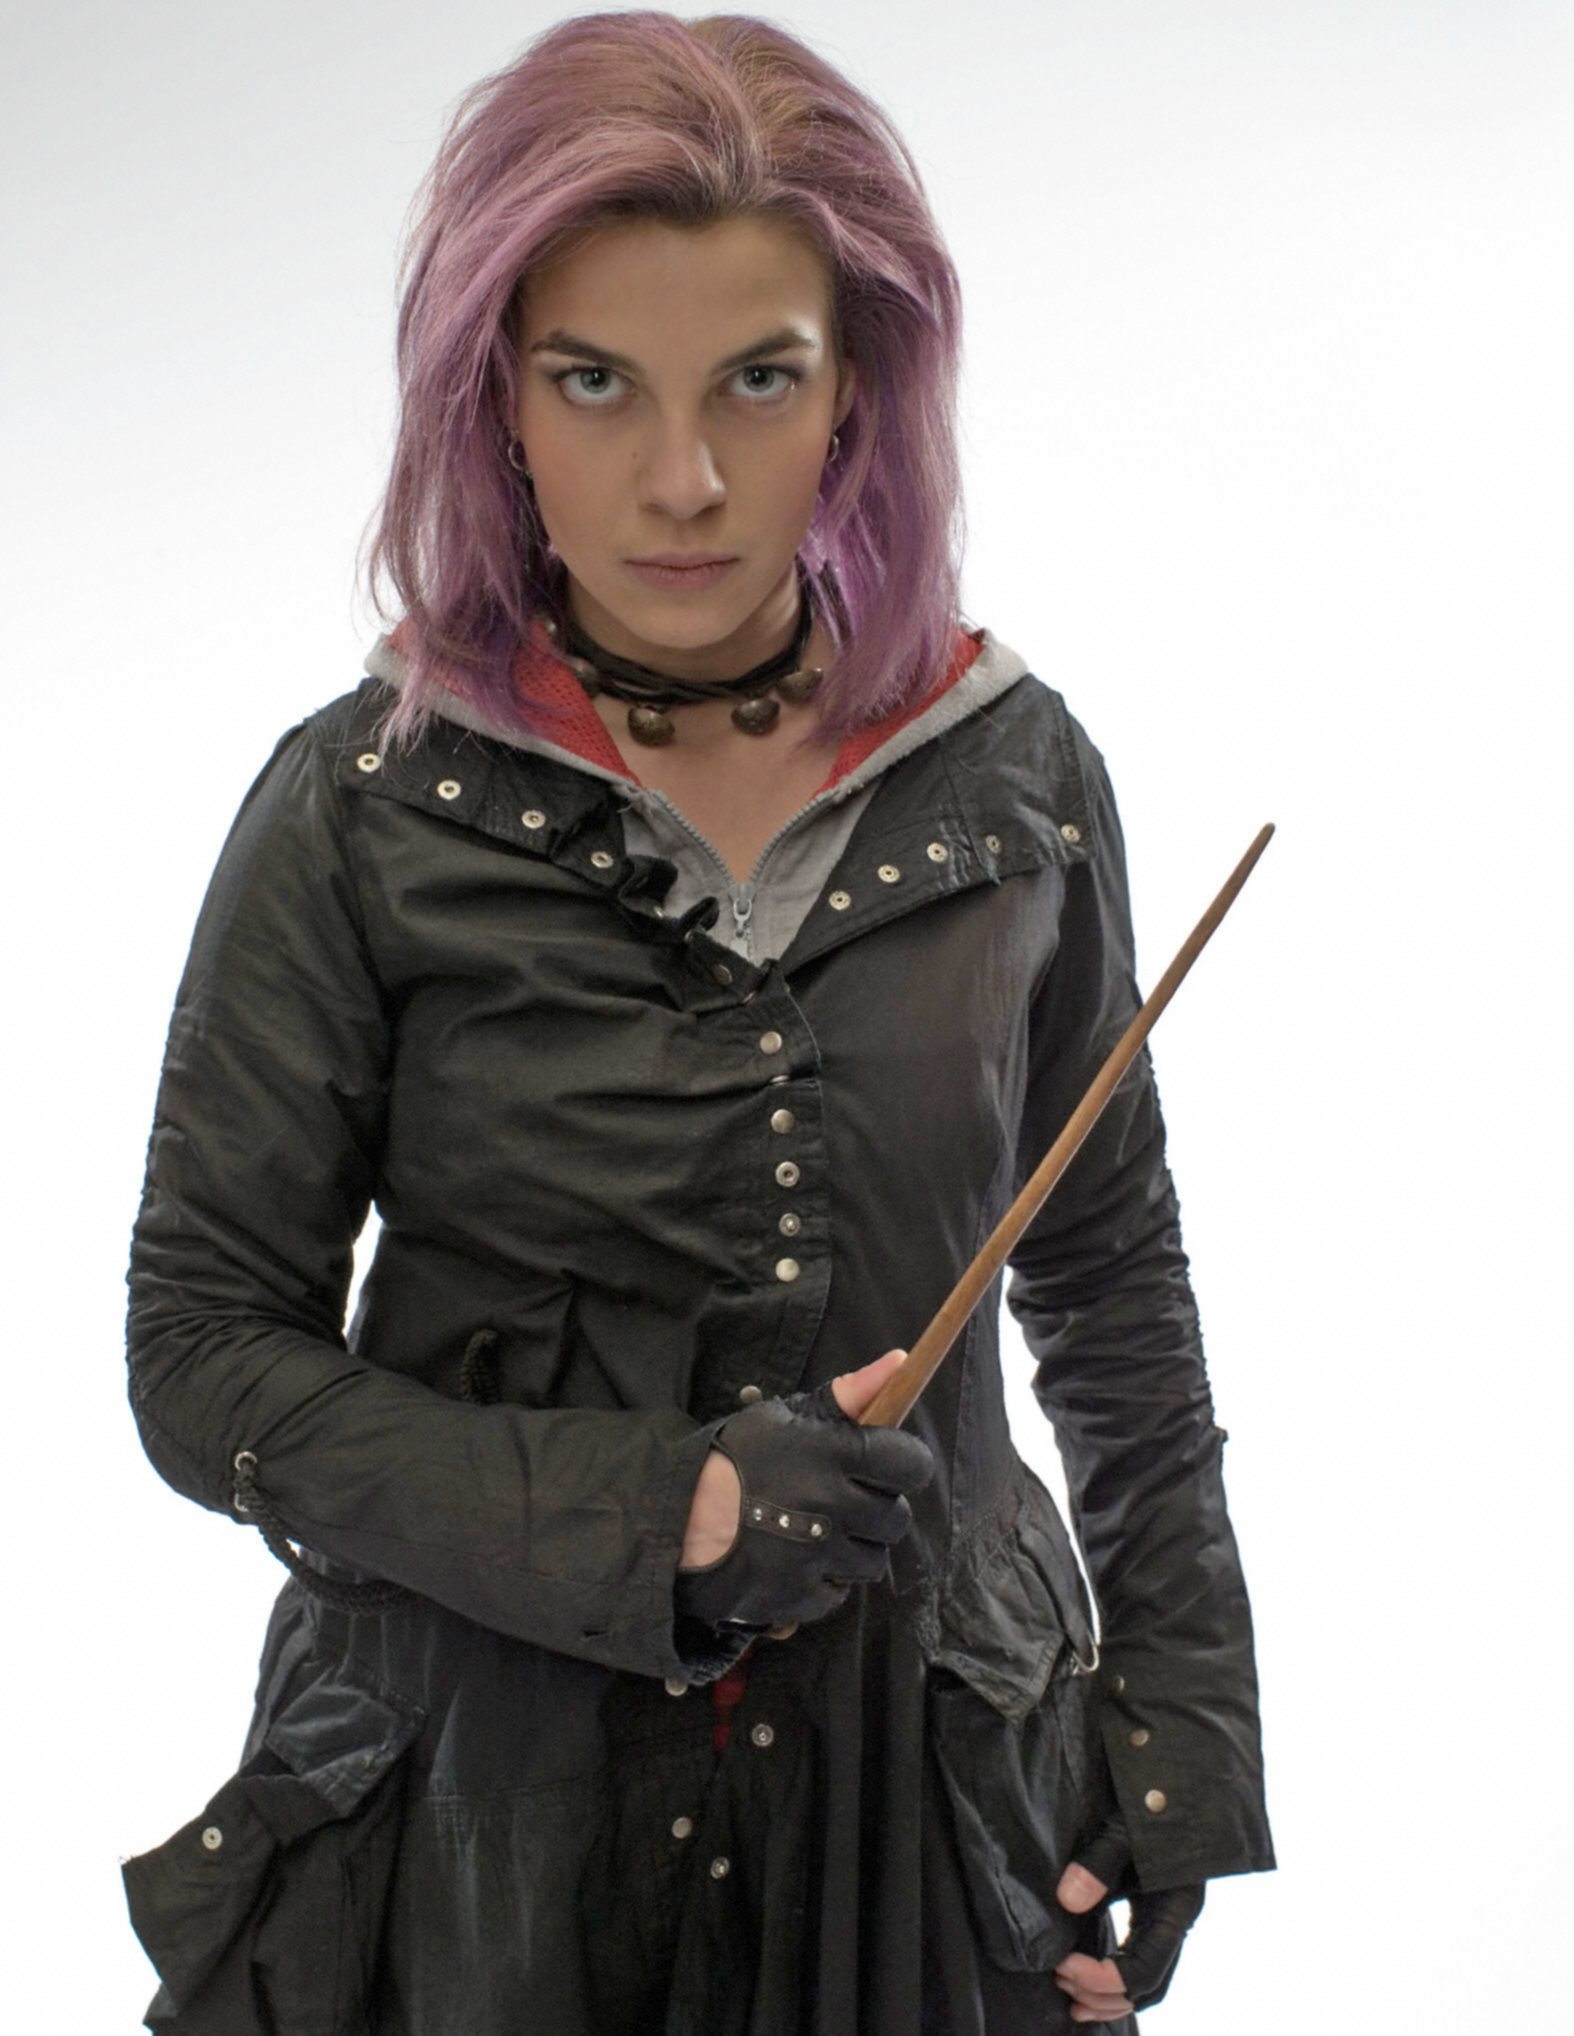 Who portrayed Nymphadora Tonks in the Harry Potter films?